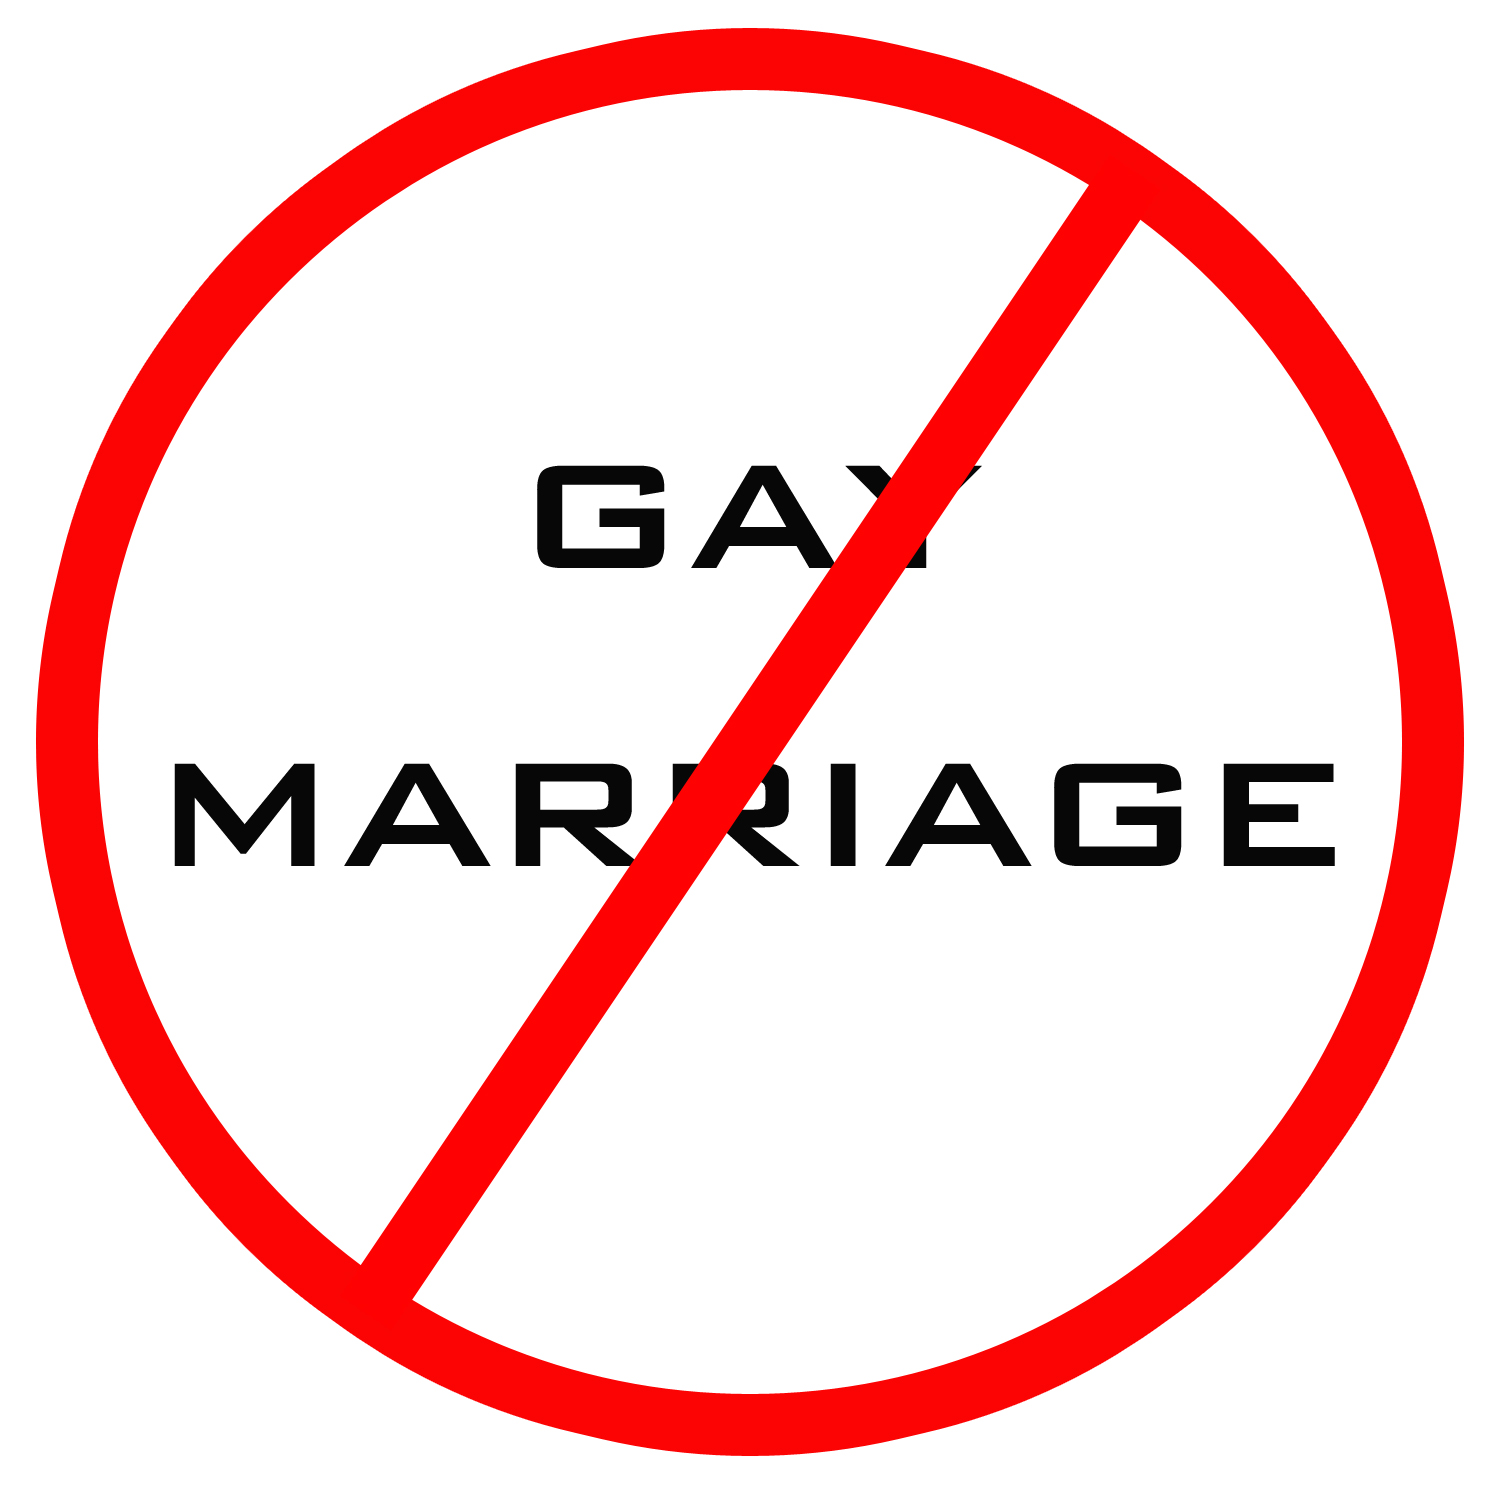 AUG-5-CARIBBEAN-NATIONAL-WEEKLY-NEW-No-To-Gay-marriage.jpg